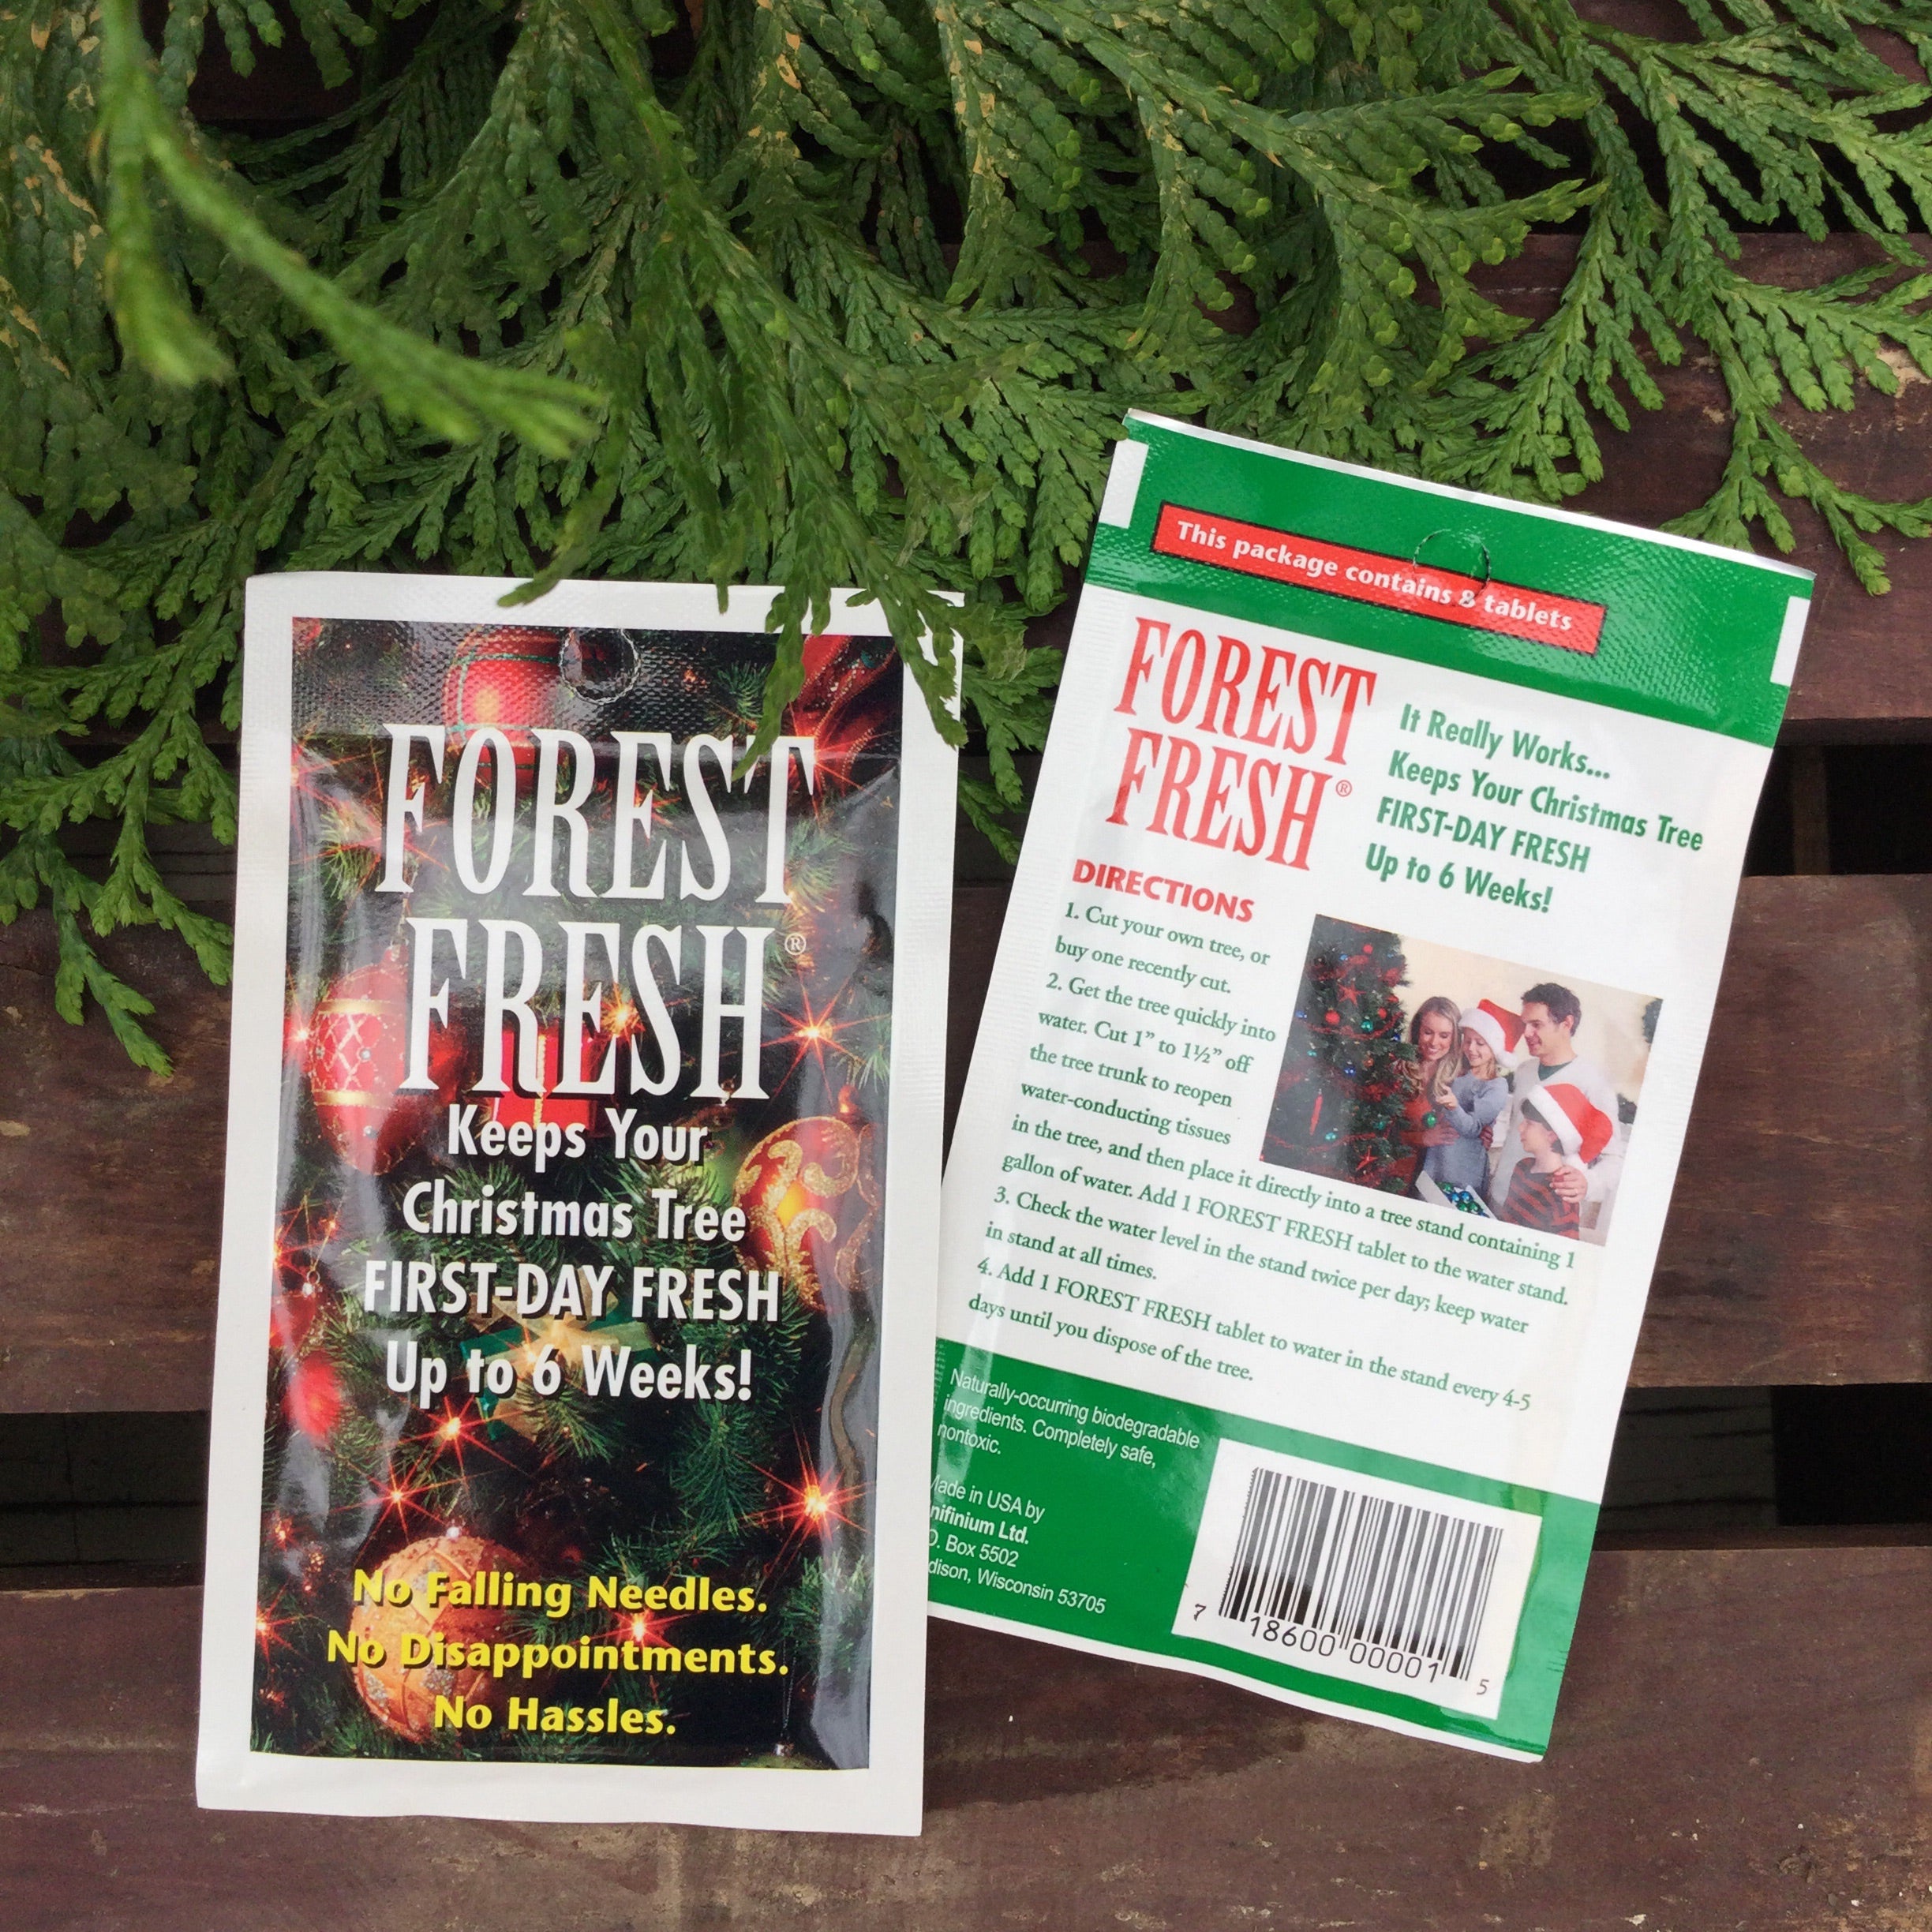 Forest Fresh Tree Tablets